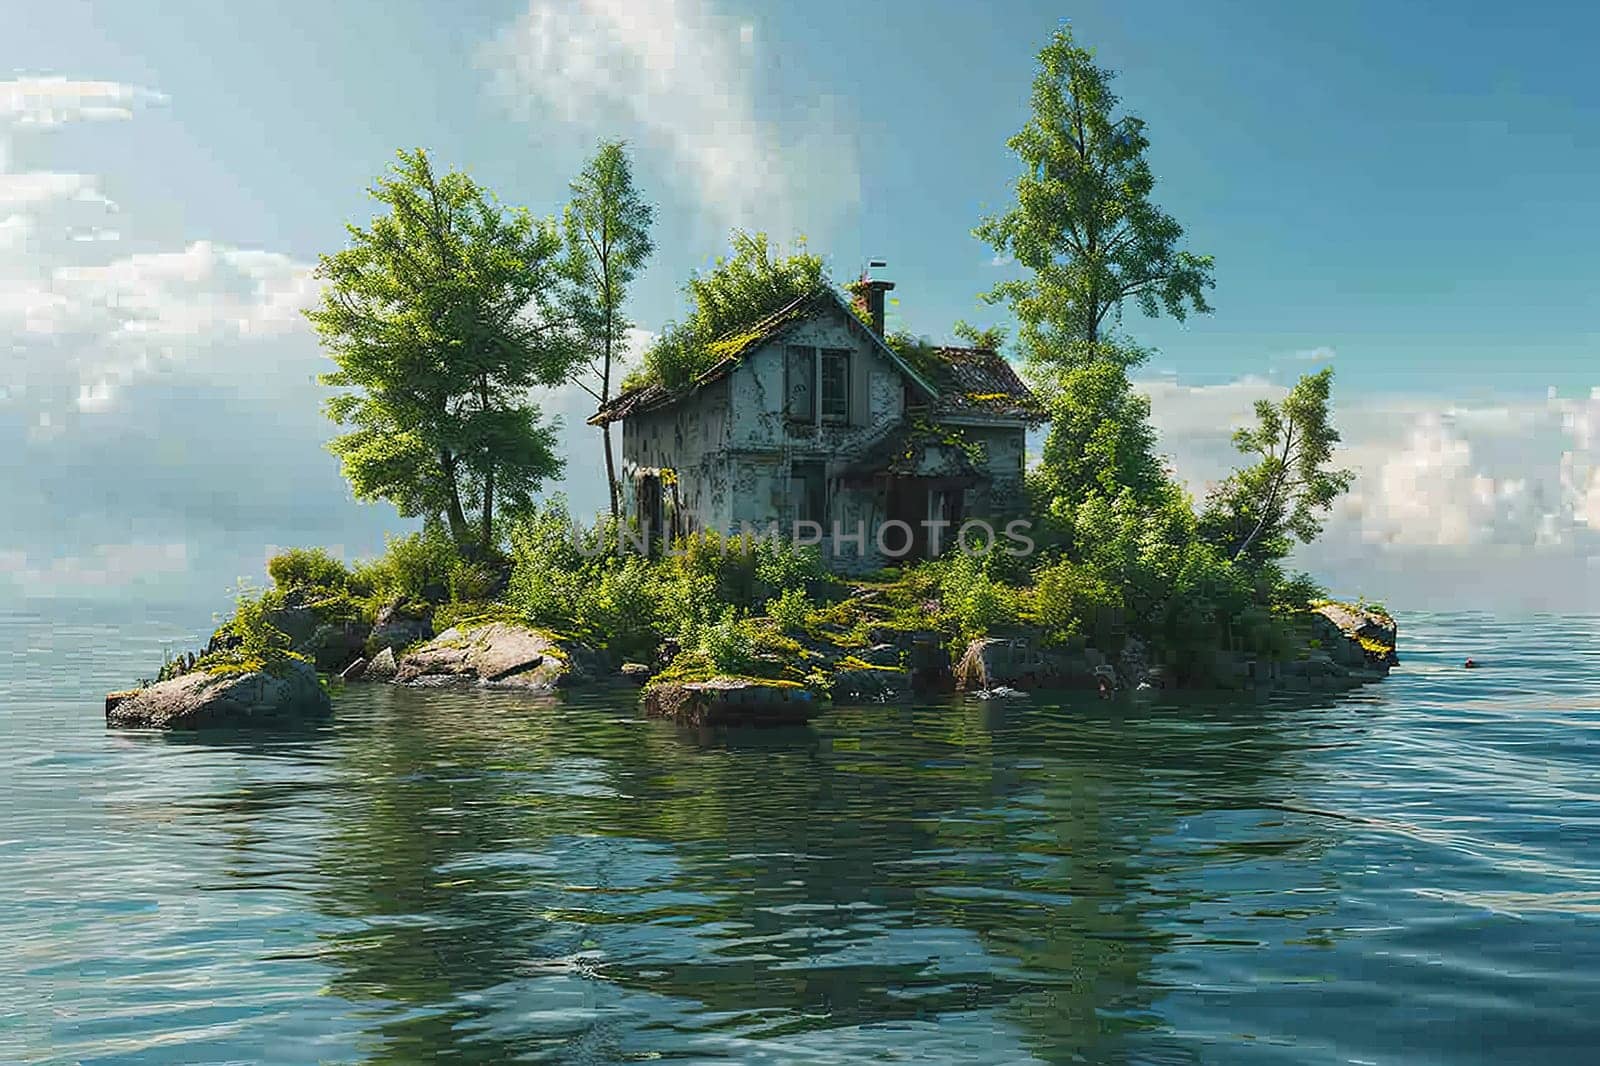 An old house on a small lonely island in the middle of the water.